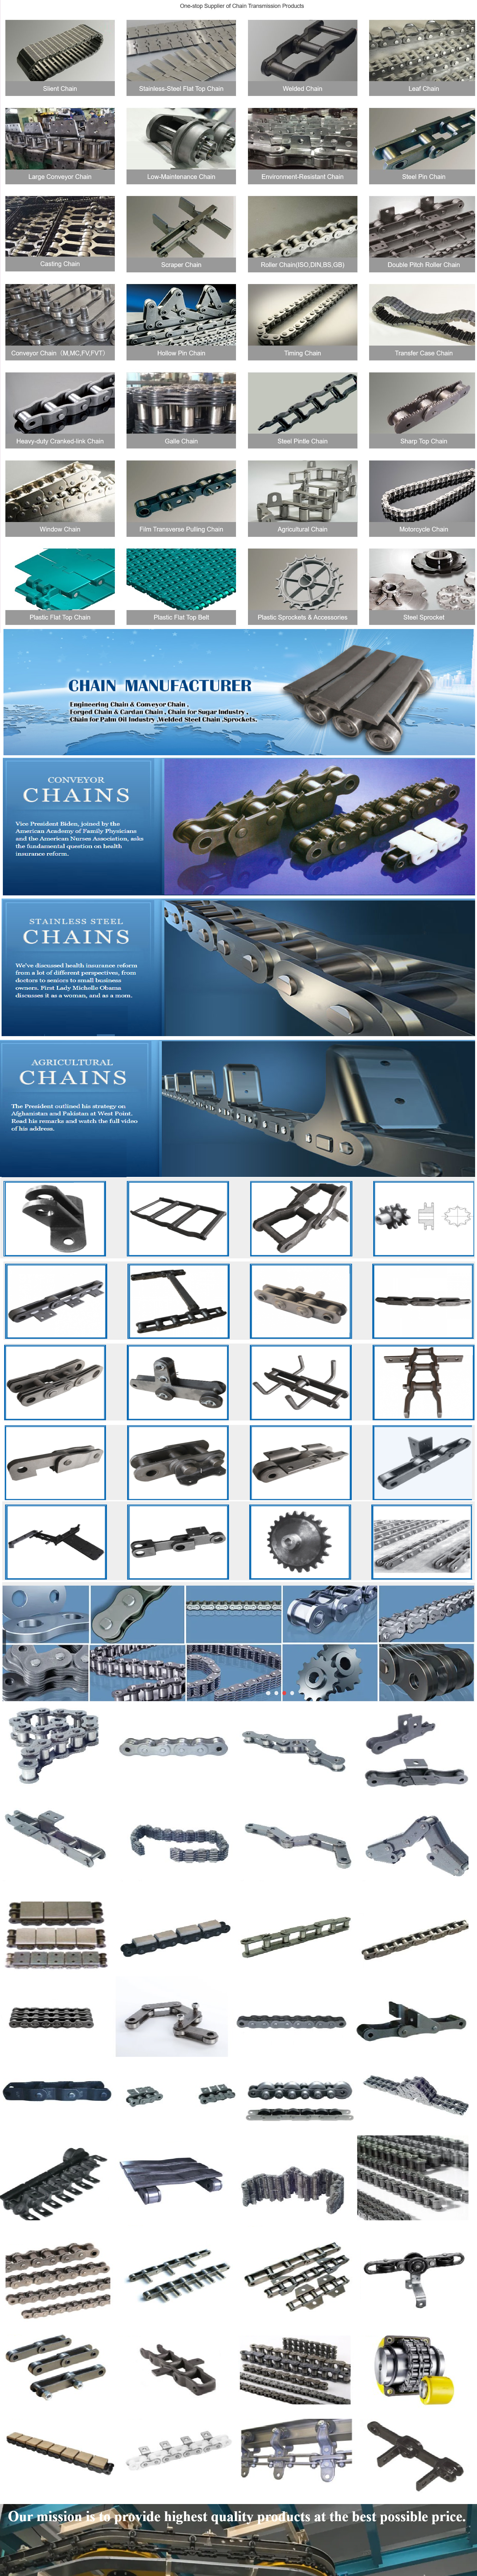 Forklift  made in China - replacement parts - ocm roller chain  in Gaza State of Palestine  Chain Flyer Chain Forklift Forklift Mast Chain Tail Lift Car Stacker Fleyer Chain with ce certificate top quality low price